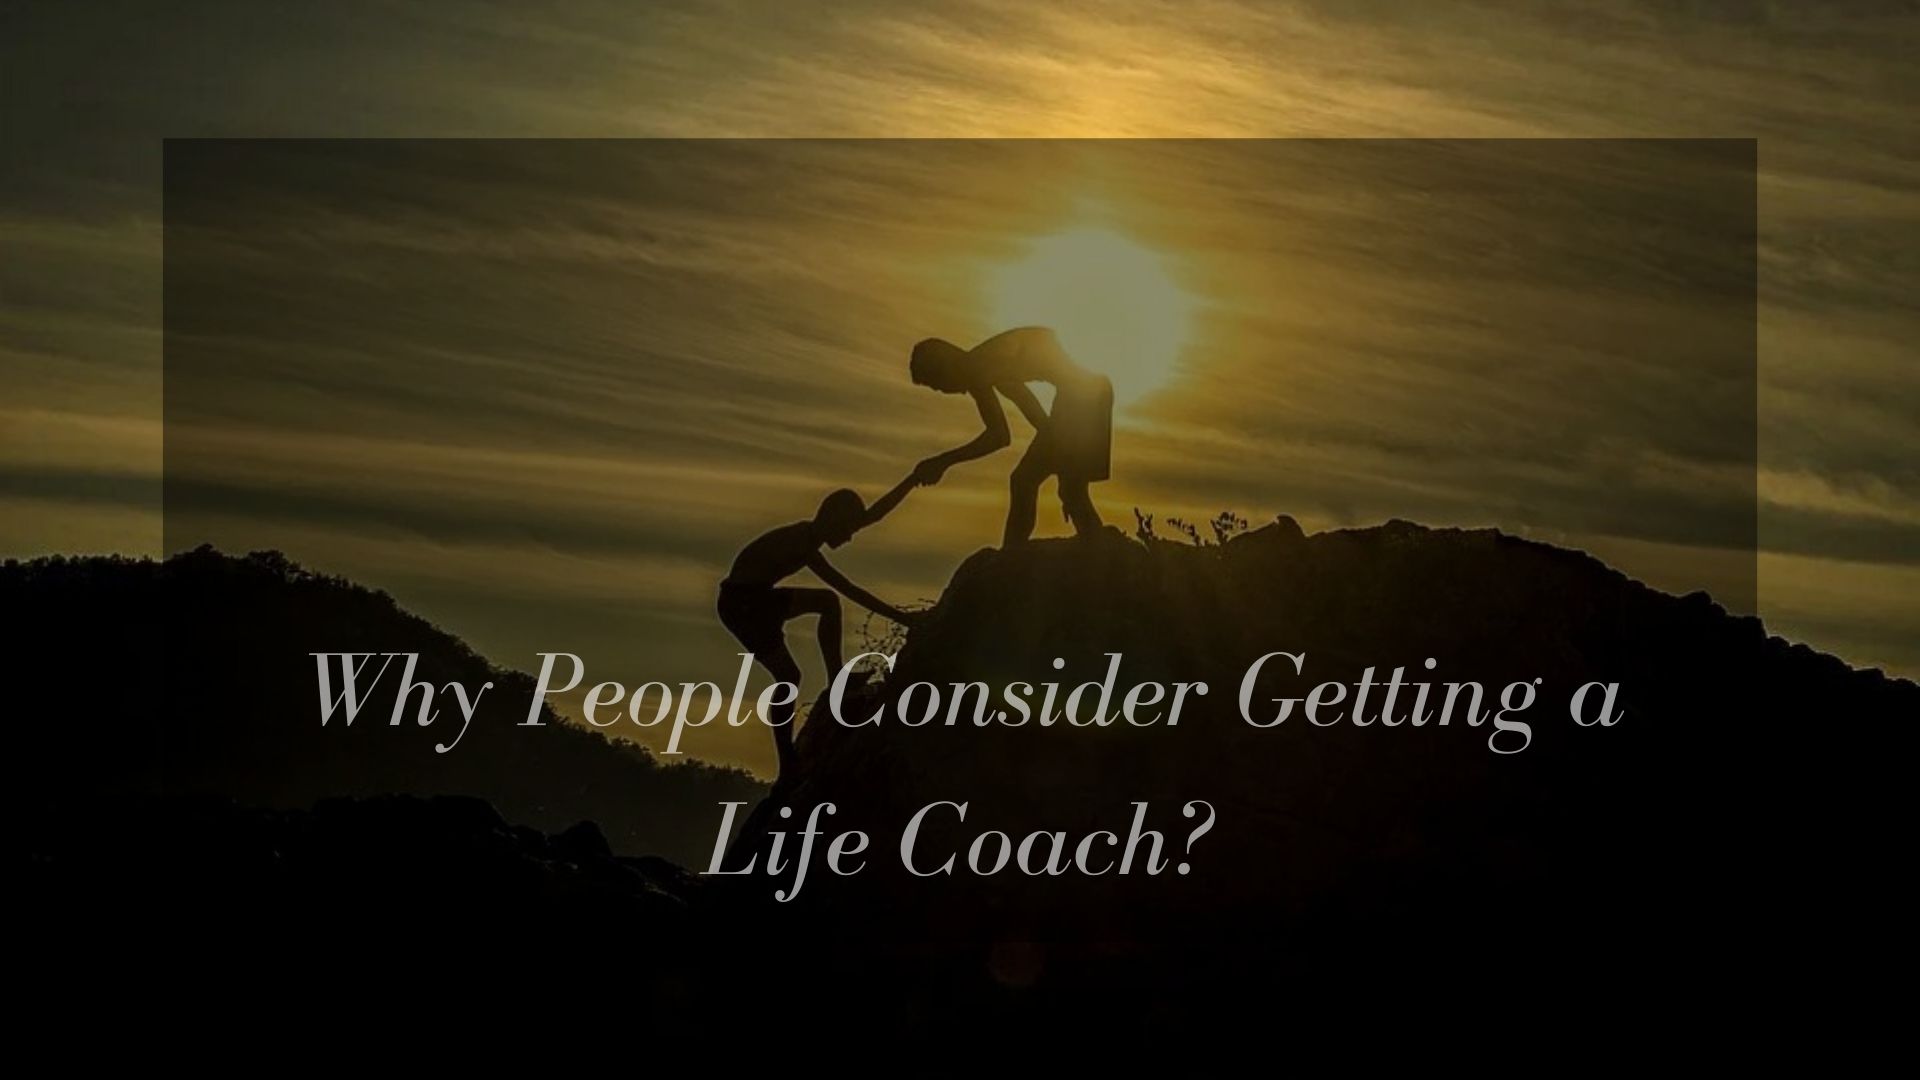 Why People Consider Getting a Life Coach?